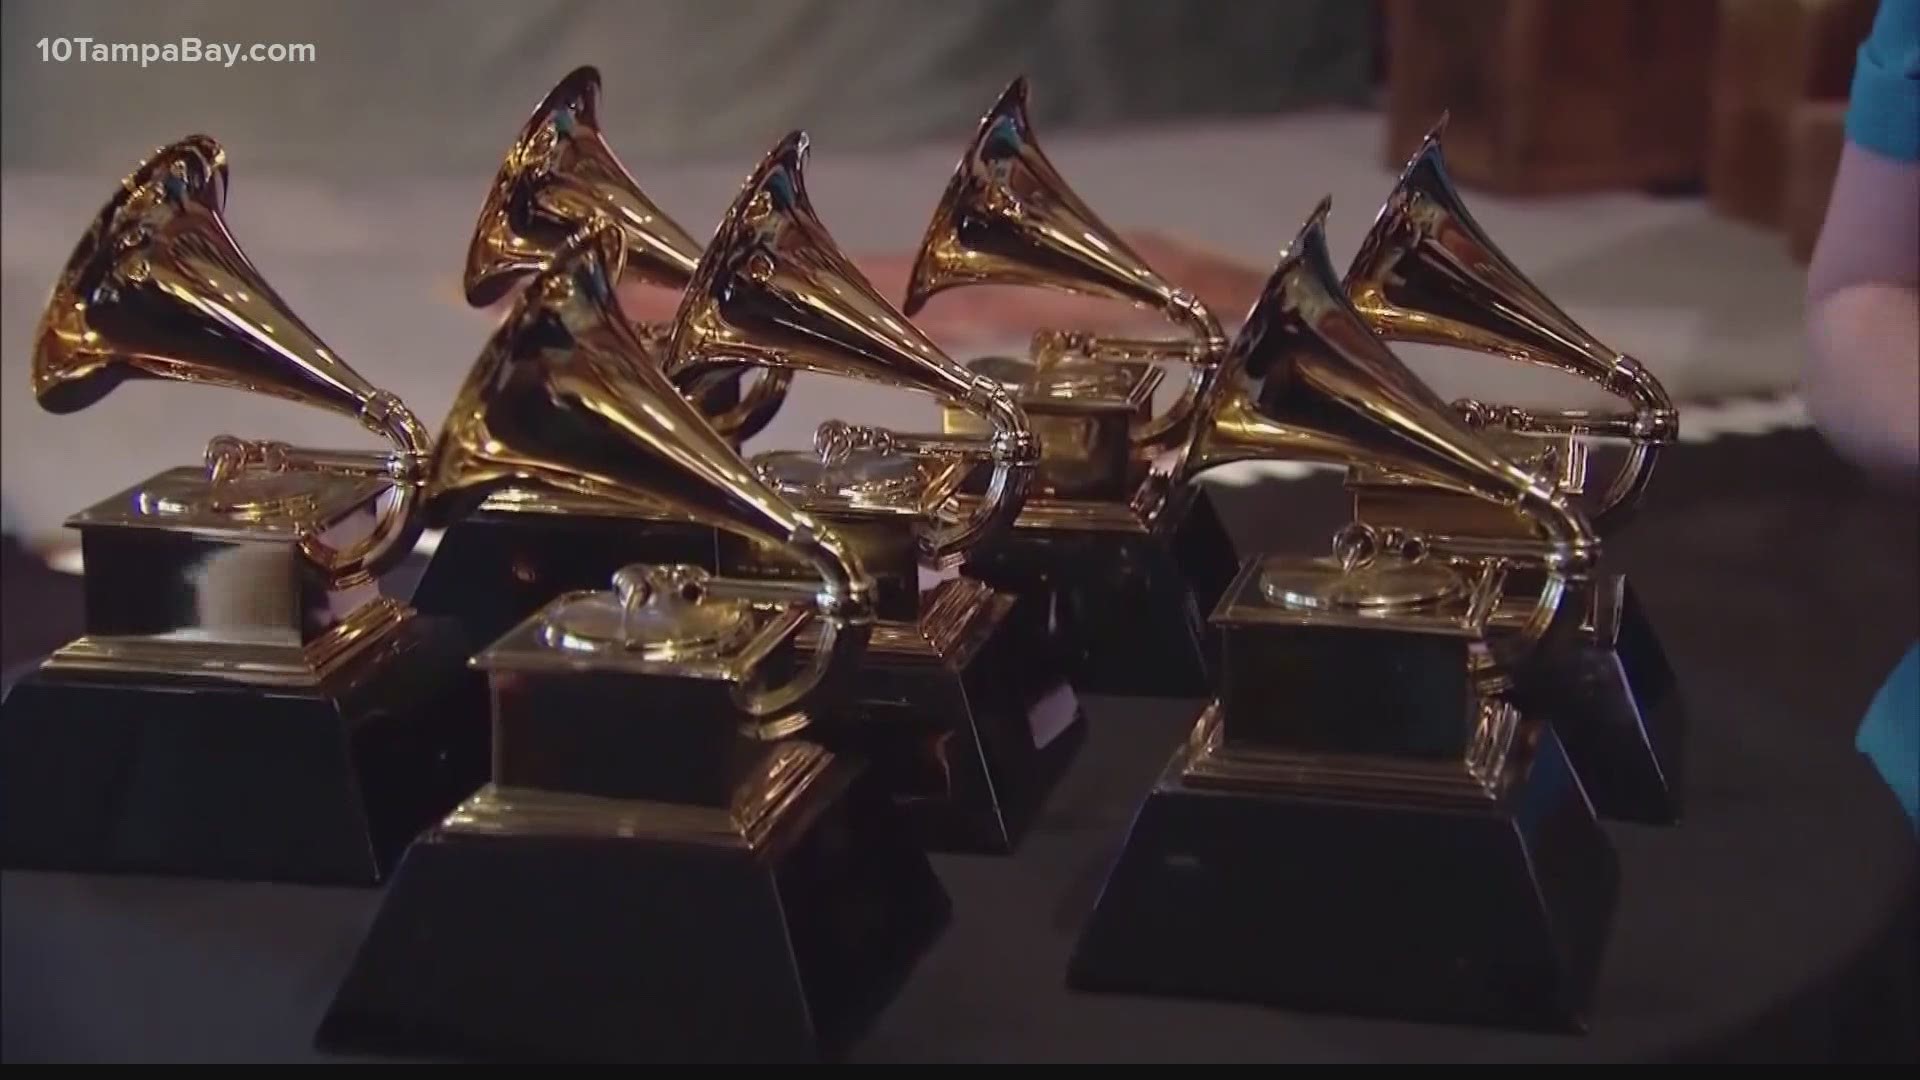 There are more than 11,000 voting members choosing GRAMMY nominees and winners.